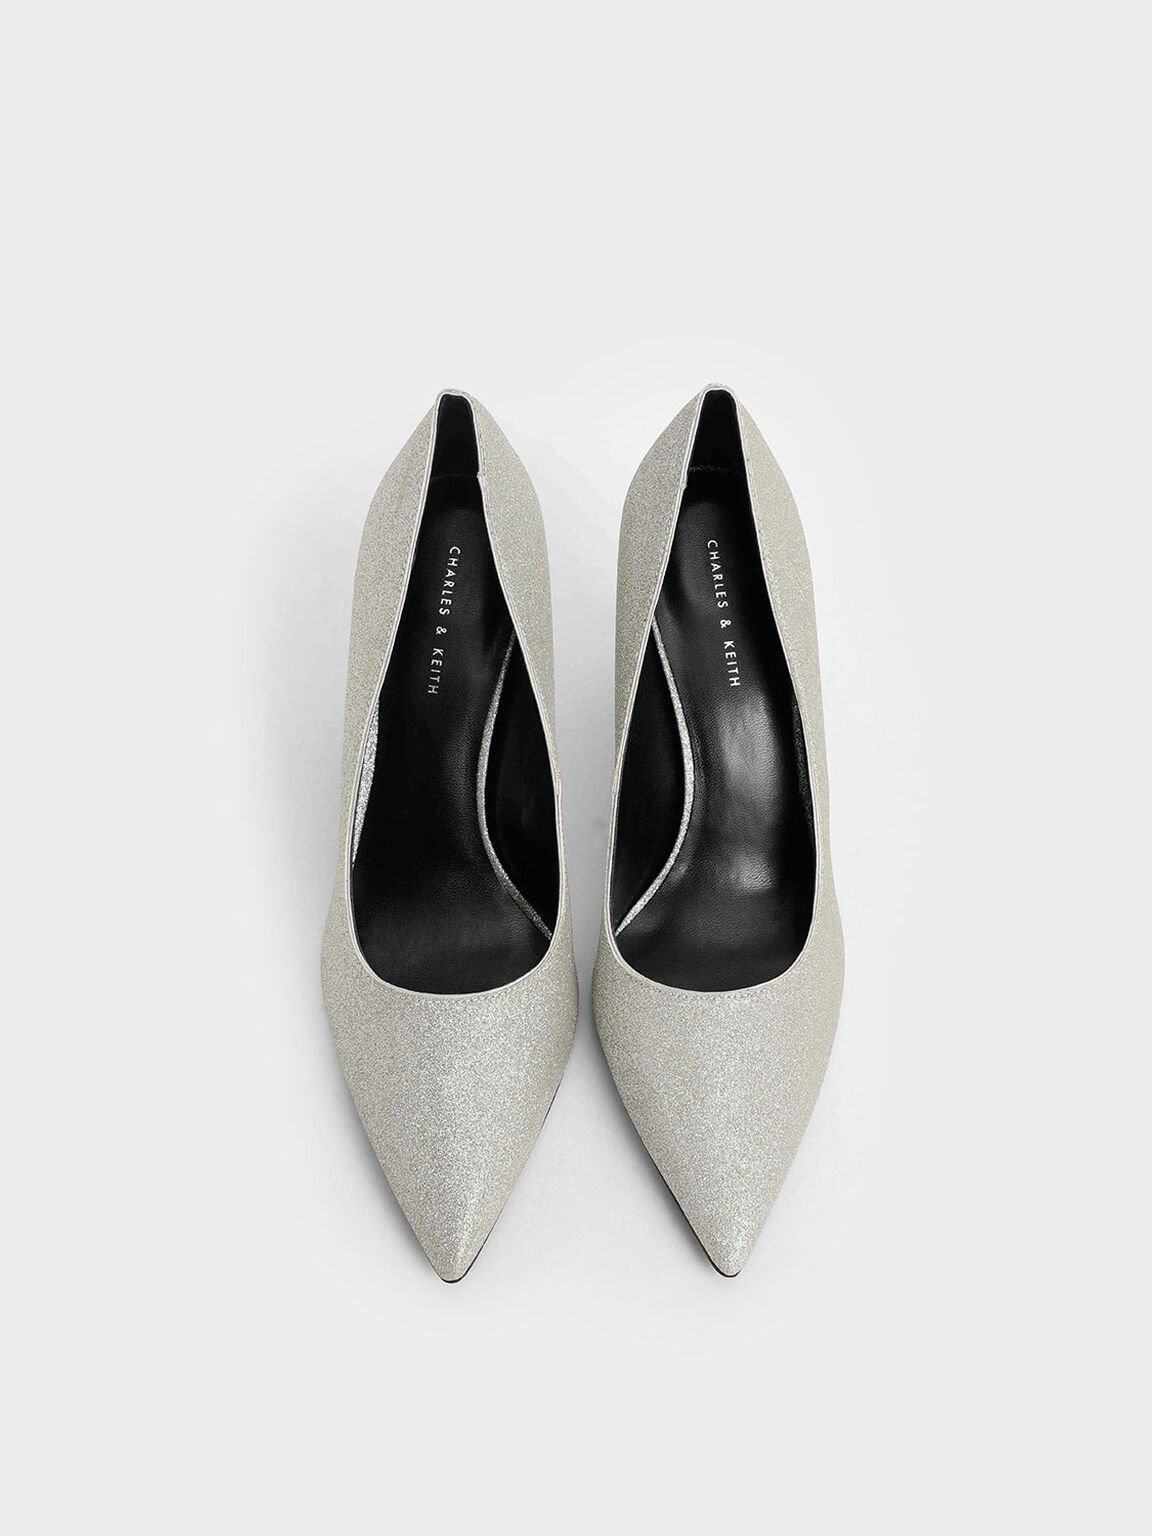 Glitter Pointed Toe Court Shoes, Silver, hi-res